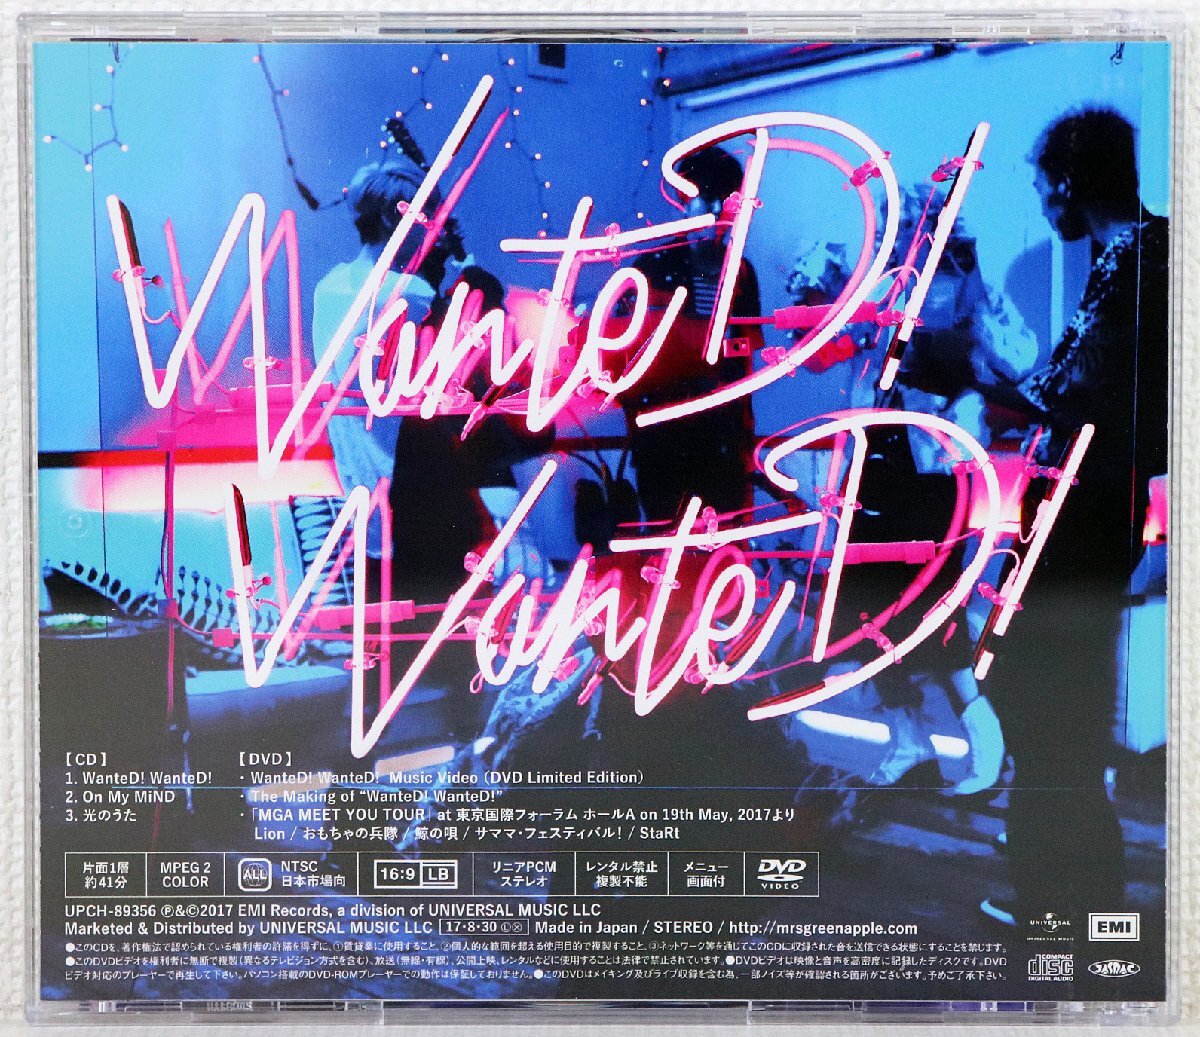 P♪中古品♪マキシシングルCD ソフト Mrs.GREEN APPLE 『WanteD! WanteD! (初回限定盤/DVD付き)』 レーベル：EMI Records UPCH-89356の画像2